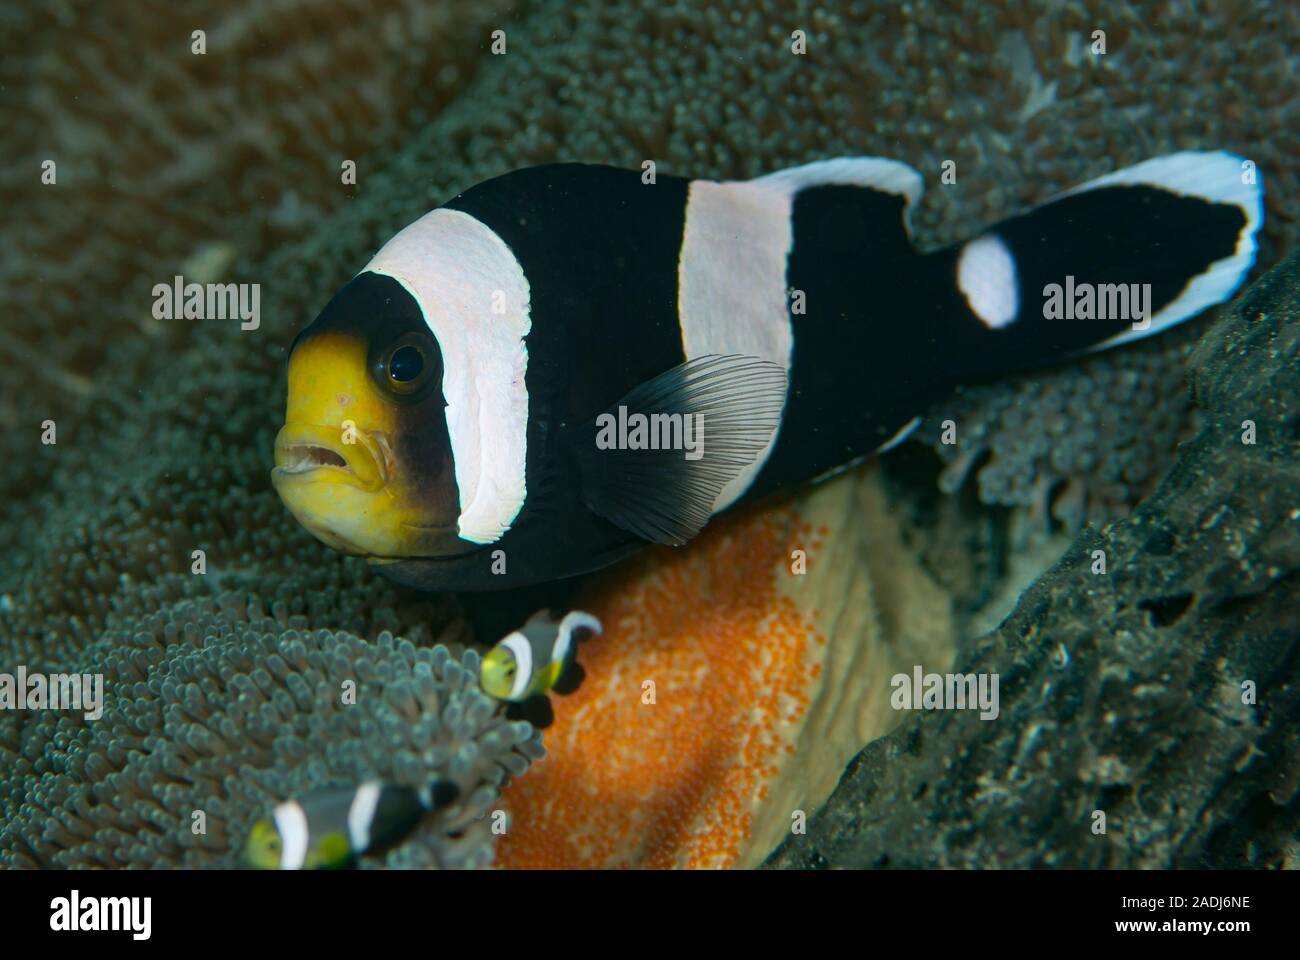 Anemonefish (or Clownfish) live in a symbiotic relationship with sea anemones.They deposit eggs close to the anemone. Stock Photo